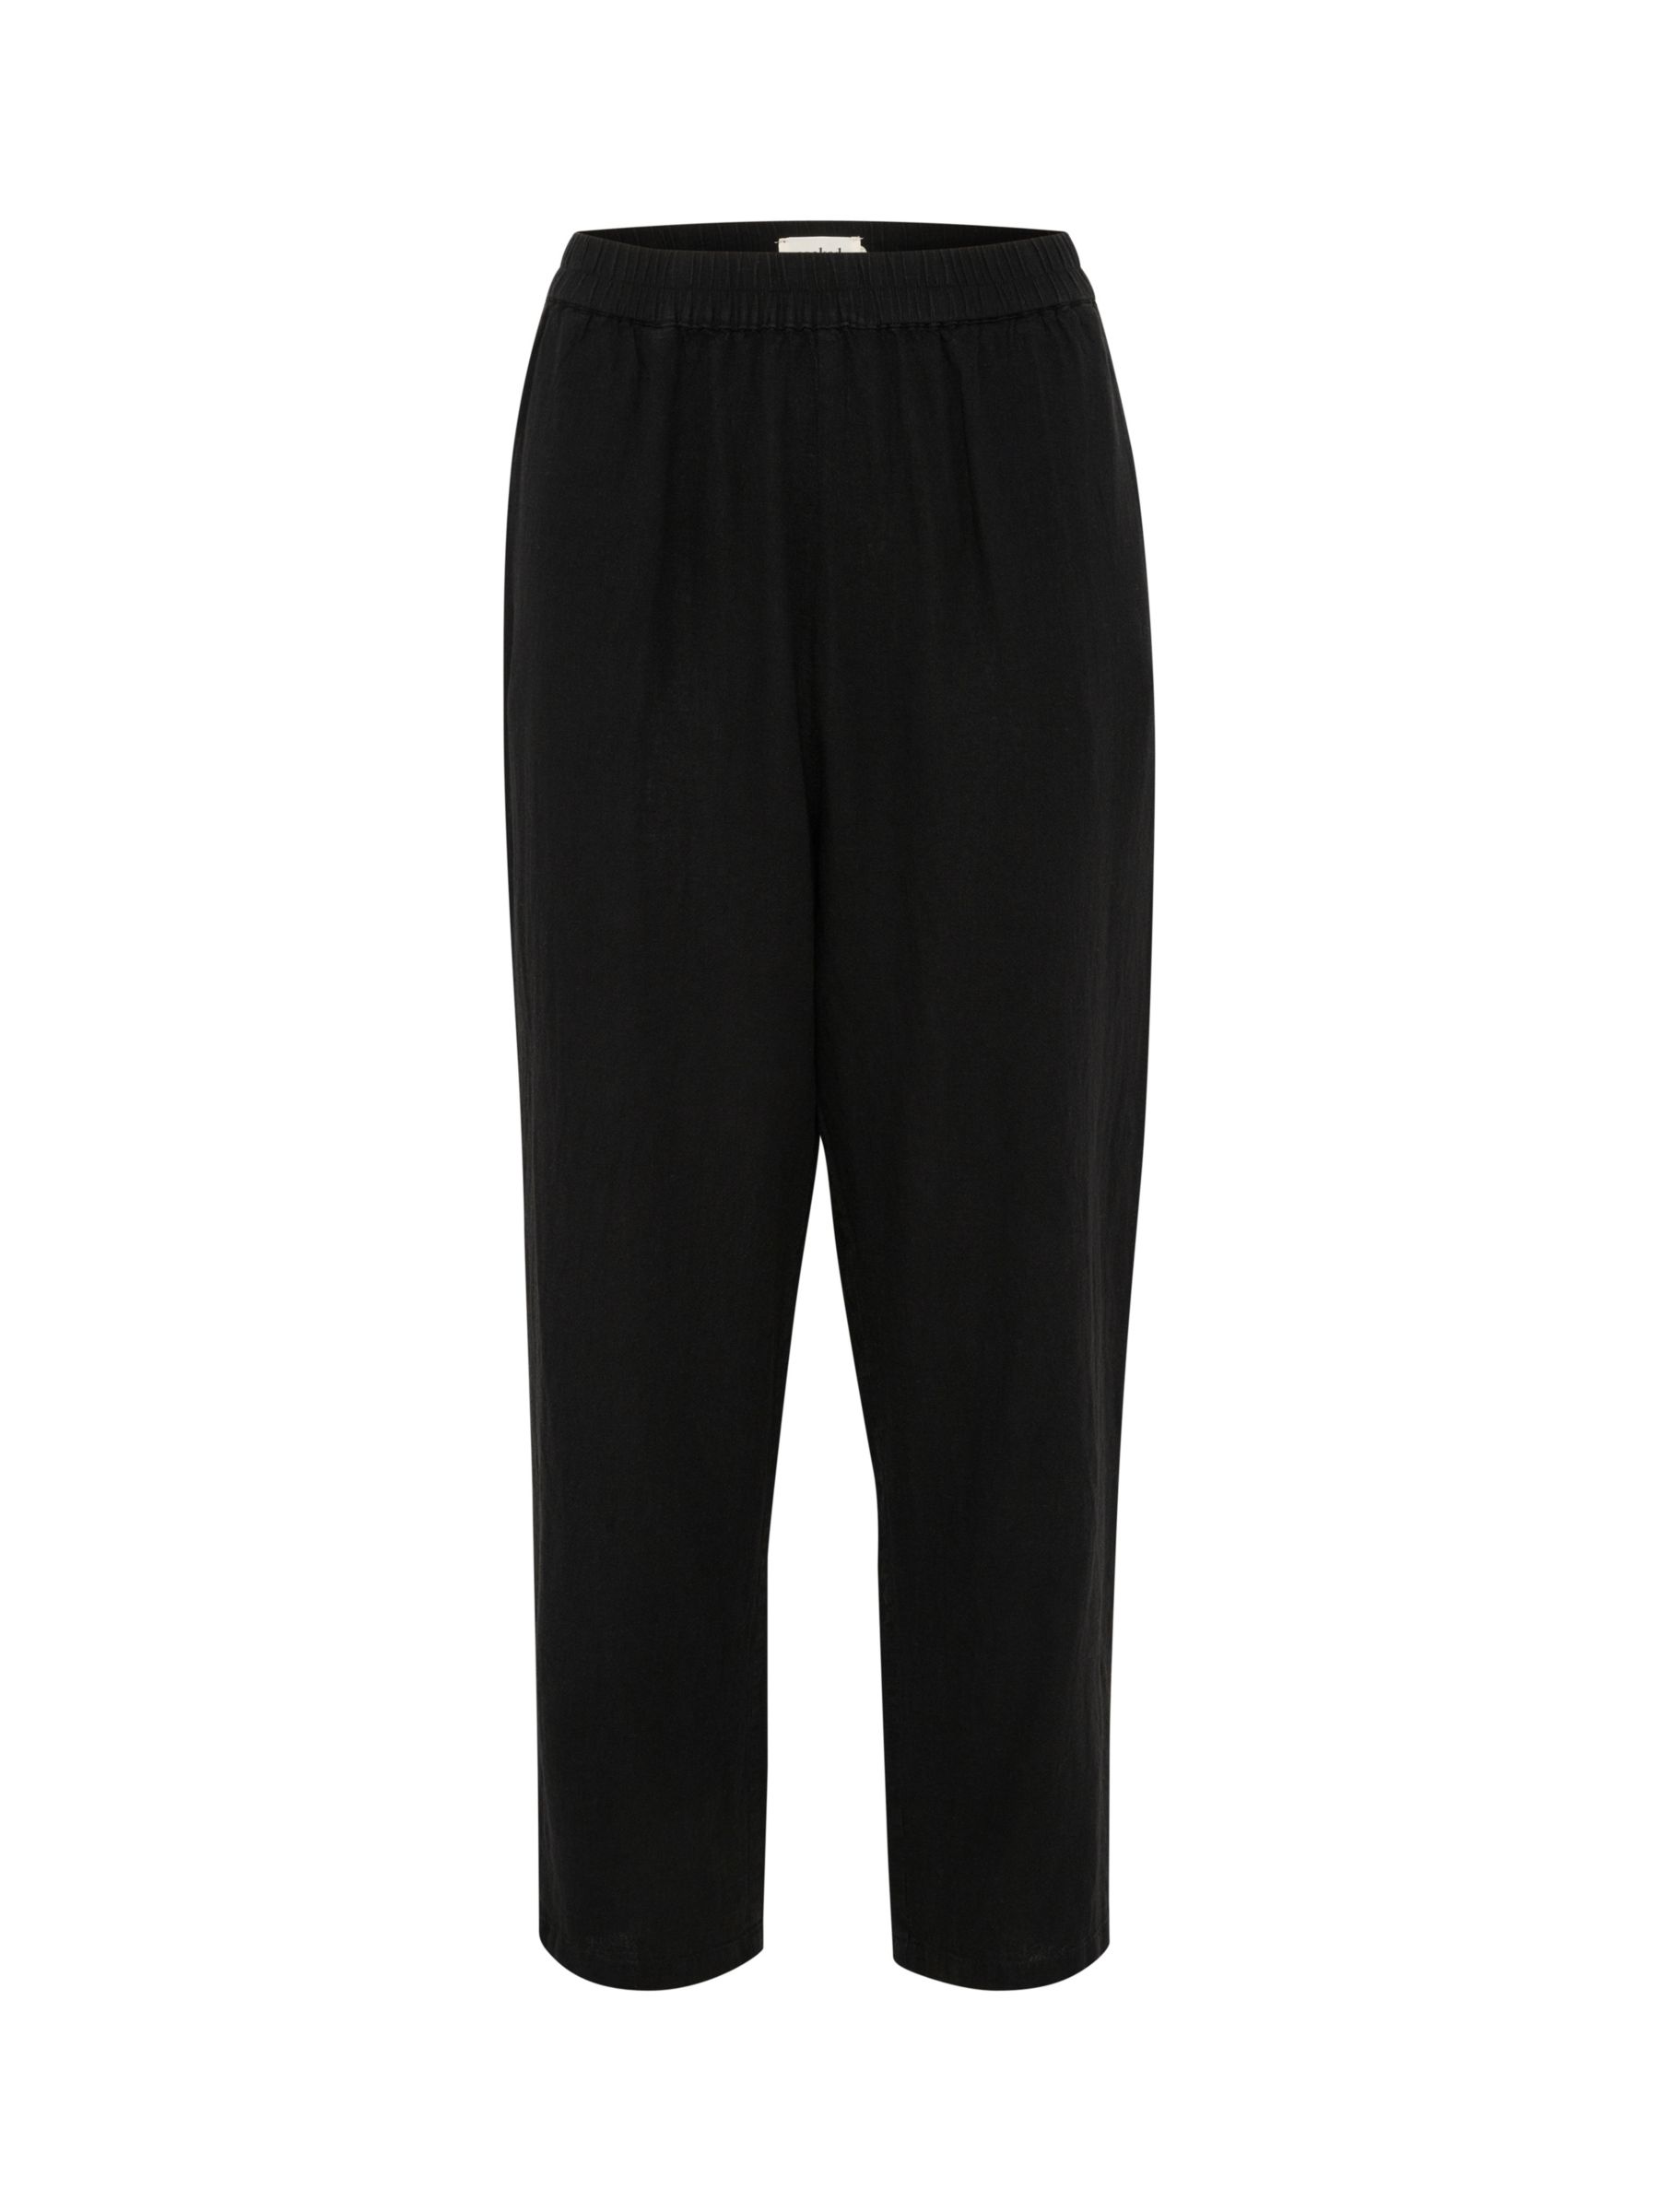 Soaked In Luxury Vinda Linen Blend Casual Cropped Trousers, Black, XS